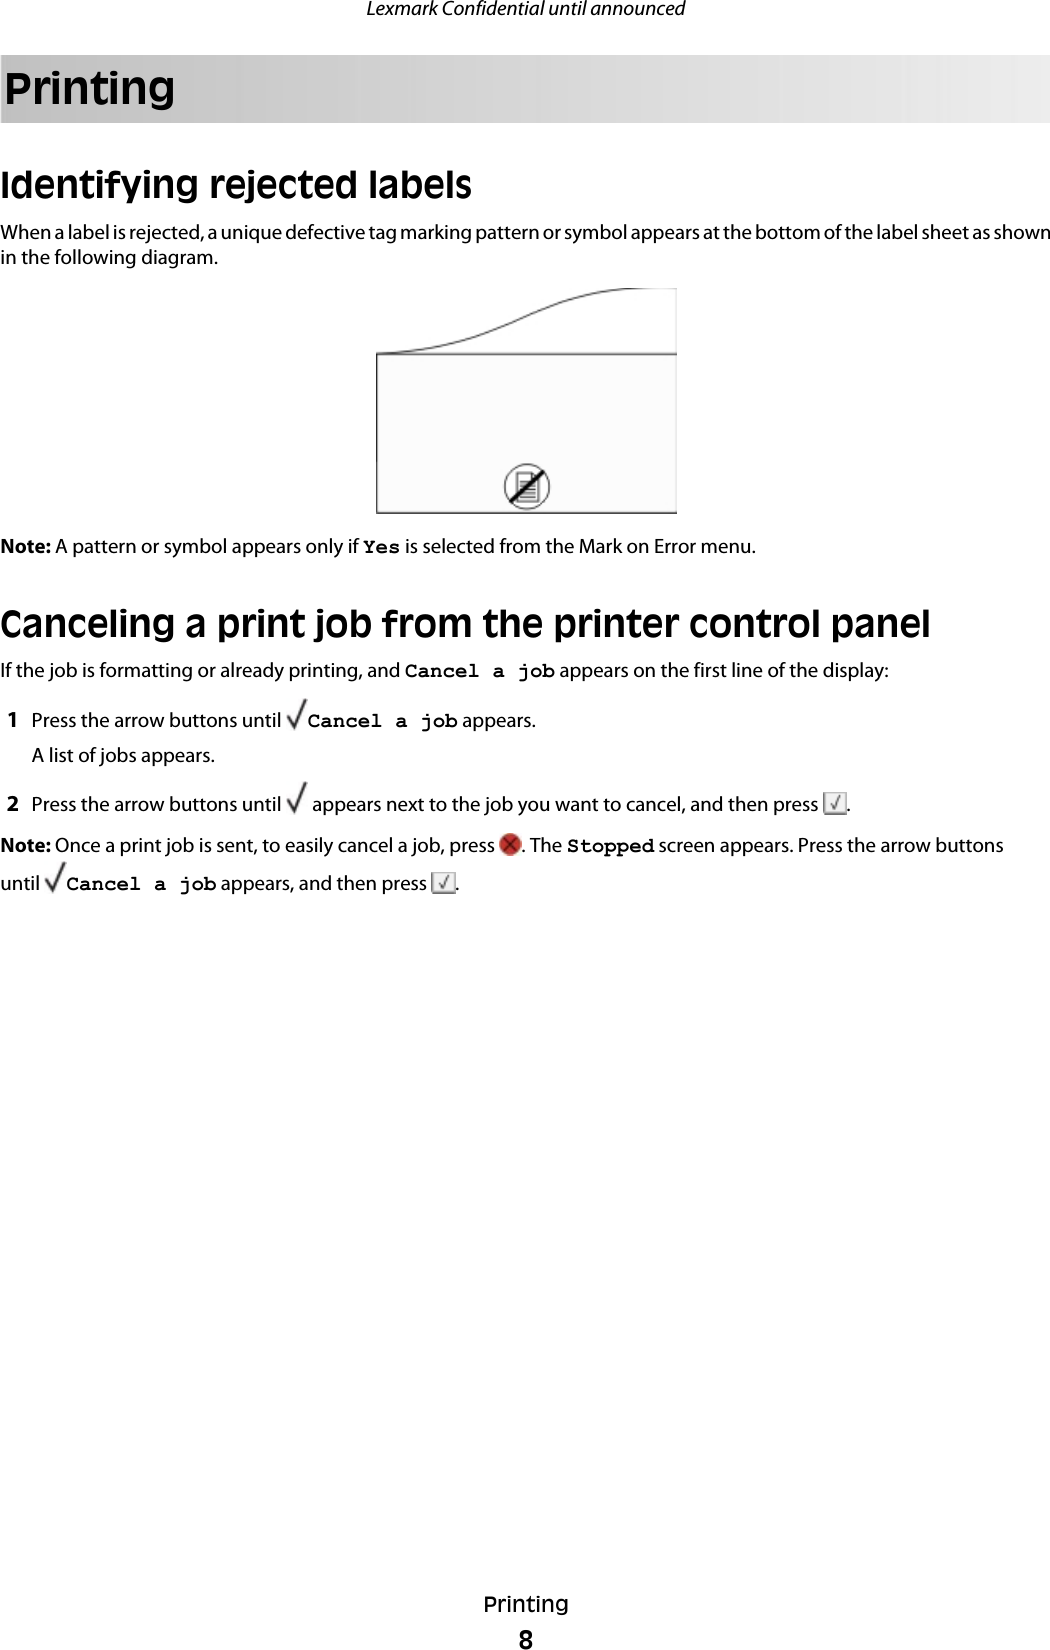 PrintingIdentifying rejected labelsWhen a label is rejected, a unique defective tag marking pattern or symbol appears at the bottom of the label sheet as shownin the following diagram.Note: A pattern or symbol appears only if Yes is selected from the Mark on Error menu.Canceling a print job from the printer control panelIf the job is formatting or already printing, and Cancel a job appears on the first line of the display:1Press the arrow buttons until  Cancel a job appears.A list of jobs appears.2Press the arrow buttons until   appears next to the job you want to cancel, and then press  .Note: Once a print job is sent, to easily cancel a job, press  . The Stopped screen appears. Press the arrow buttonsuntil  Cancel a job appears, and then press  .Lexmark Confidential until announcedPrinting8